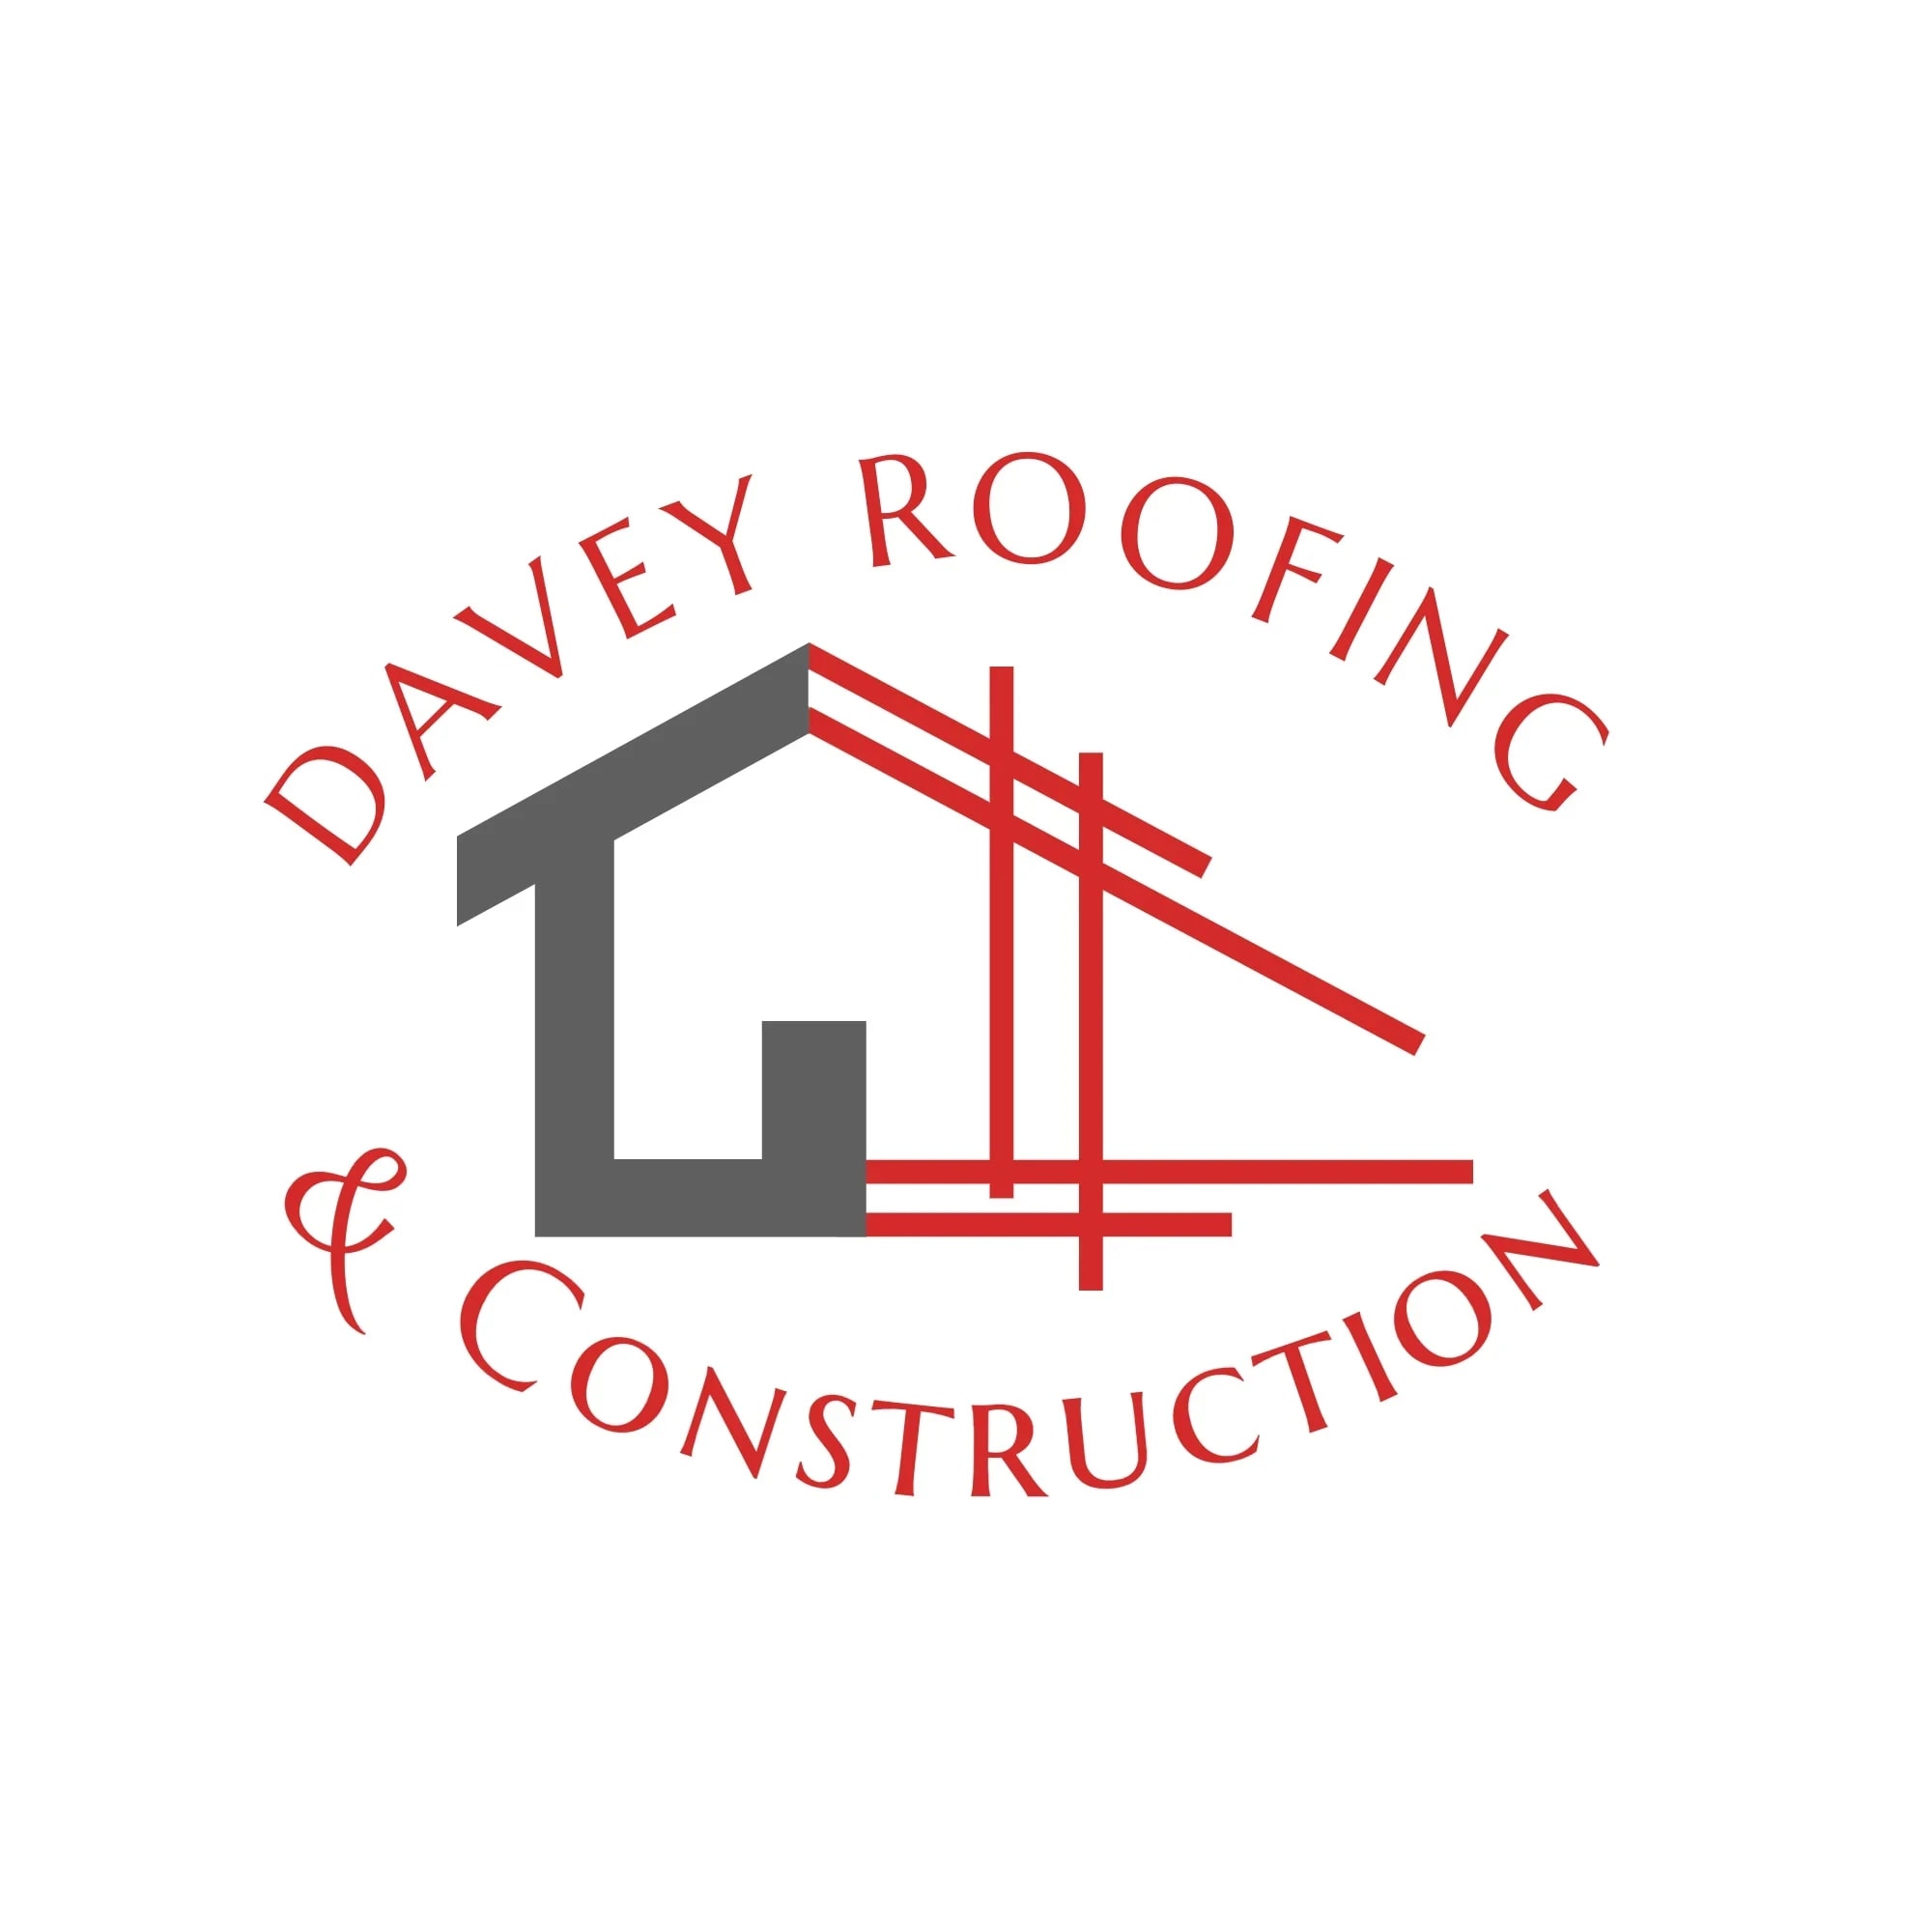 Davey Roofing & Construction